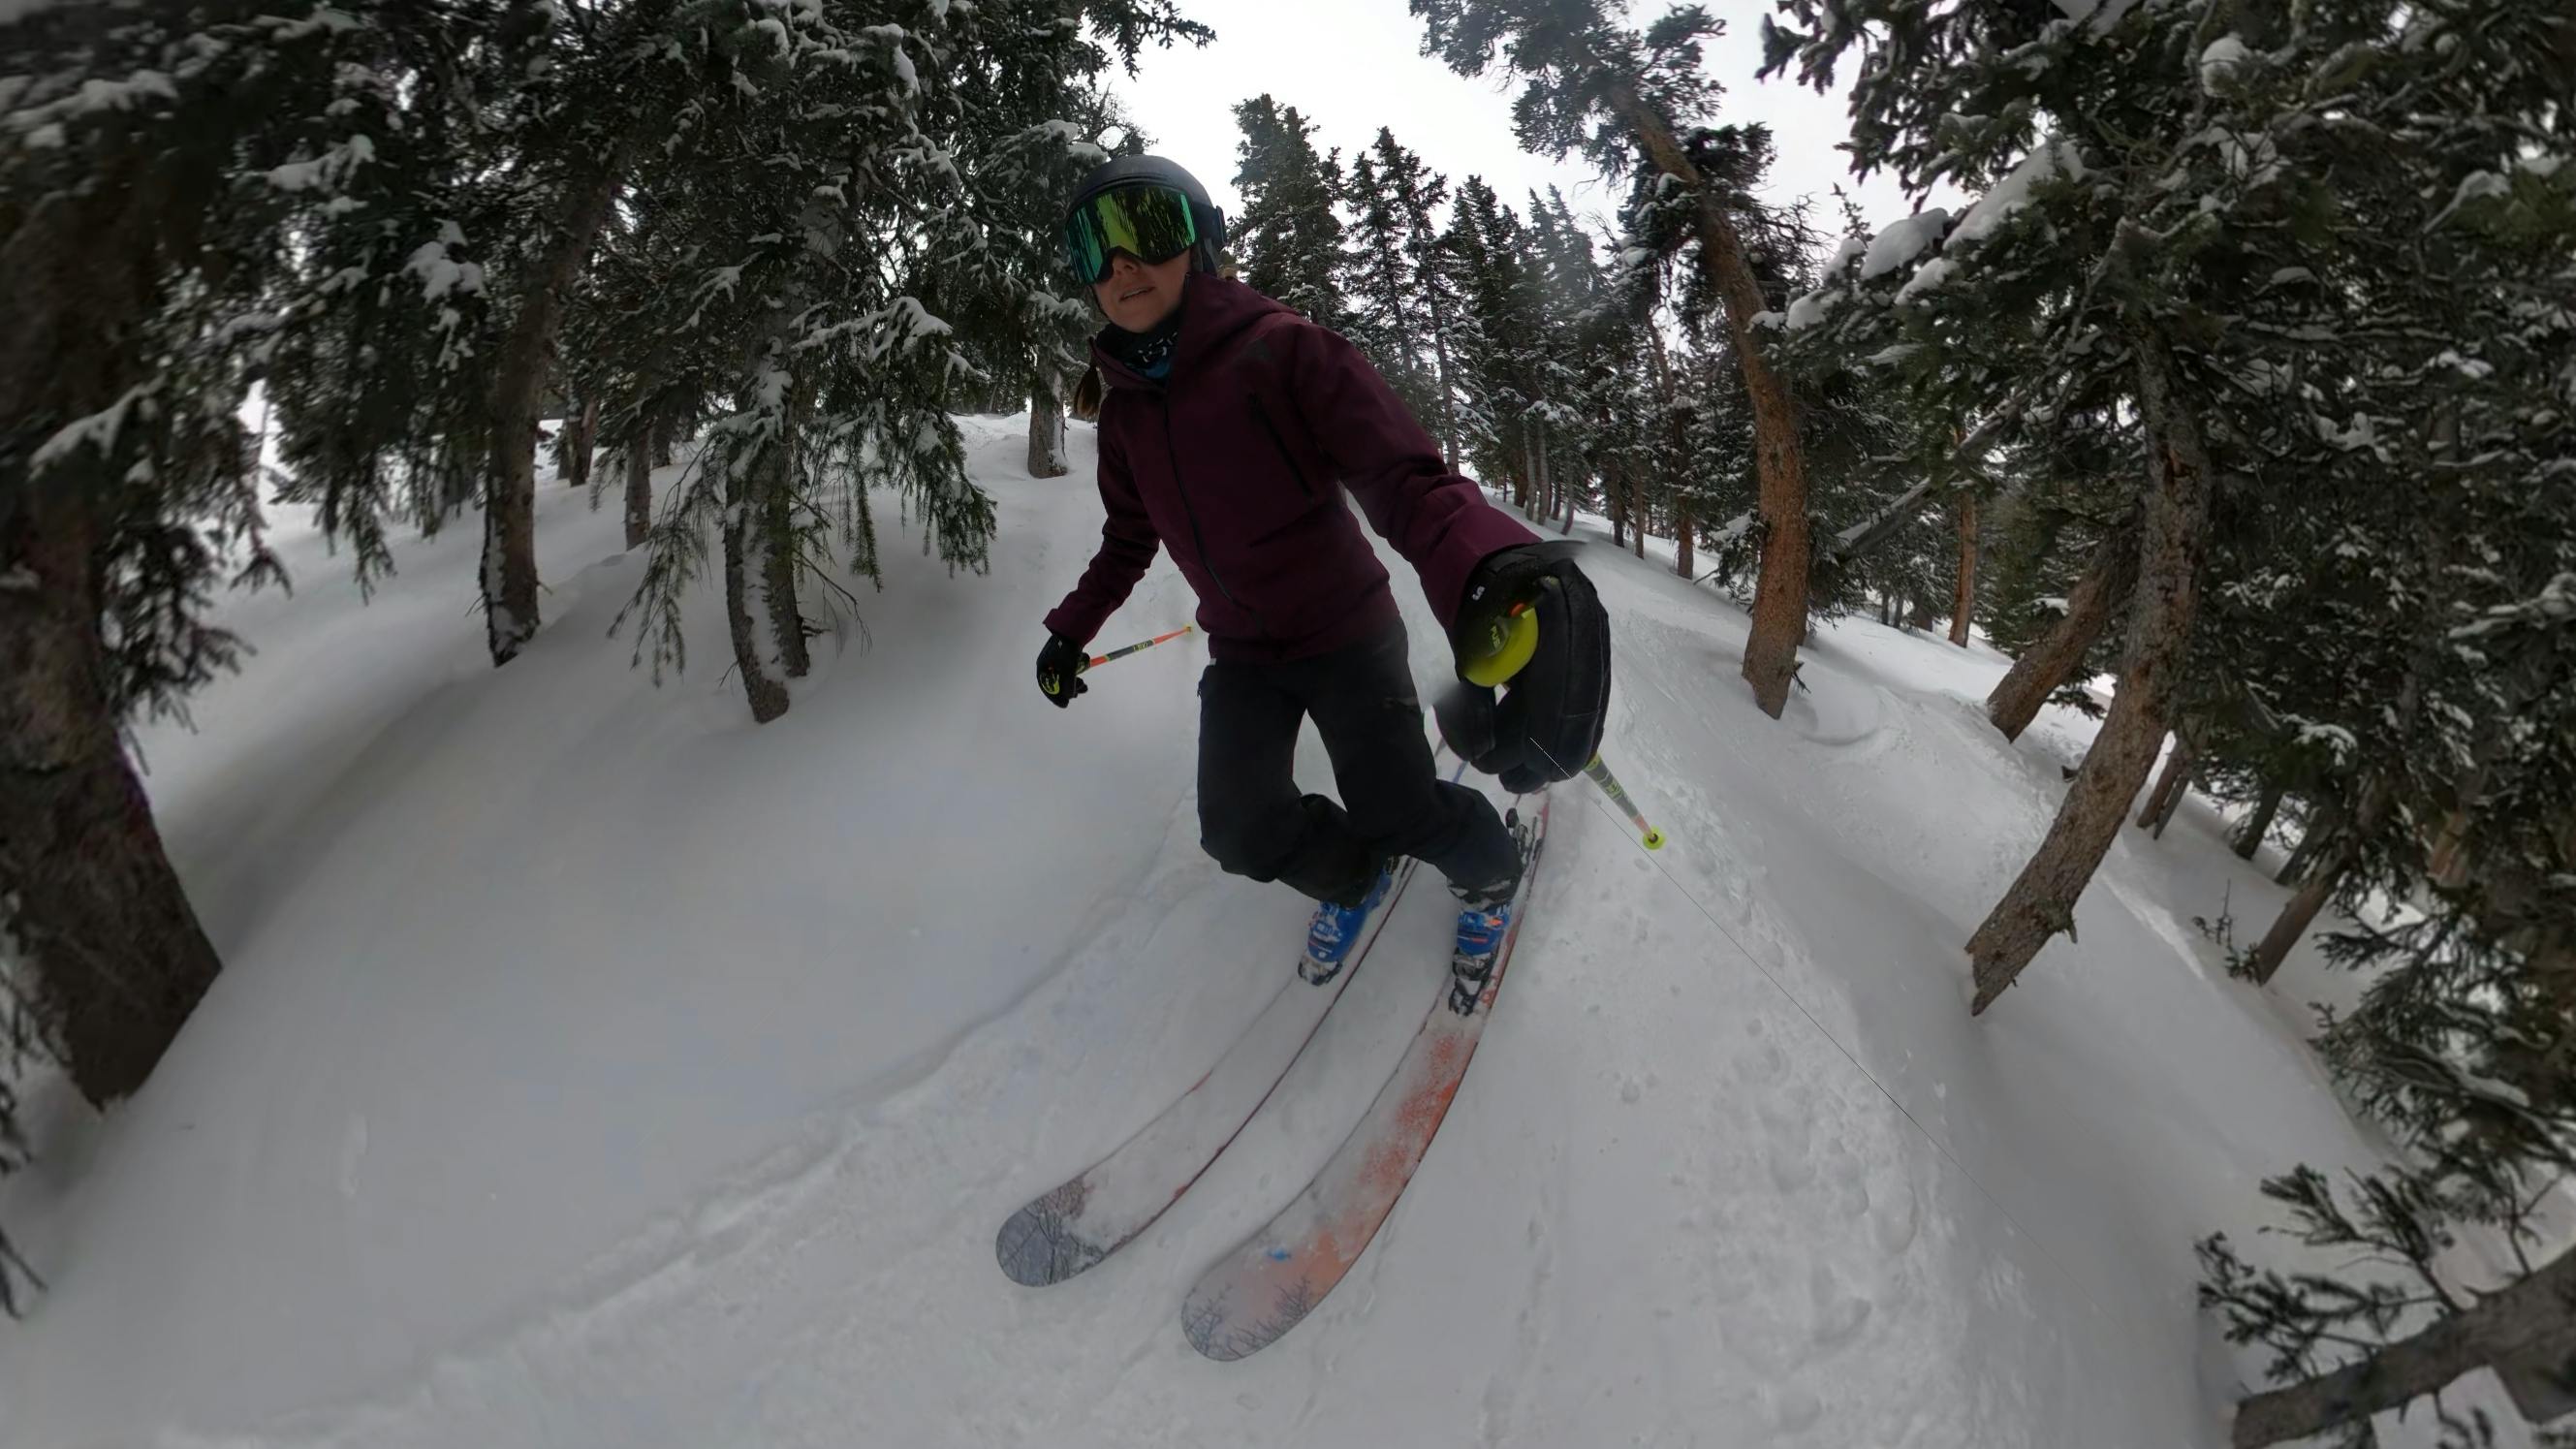 A skier on the Nordica Unleashed 108 Tree Skis. 